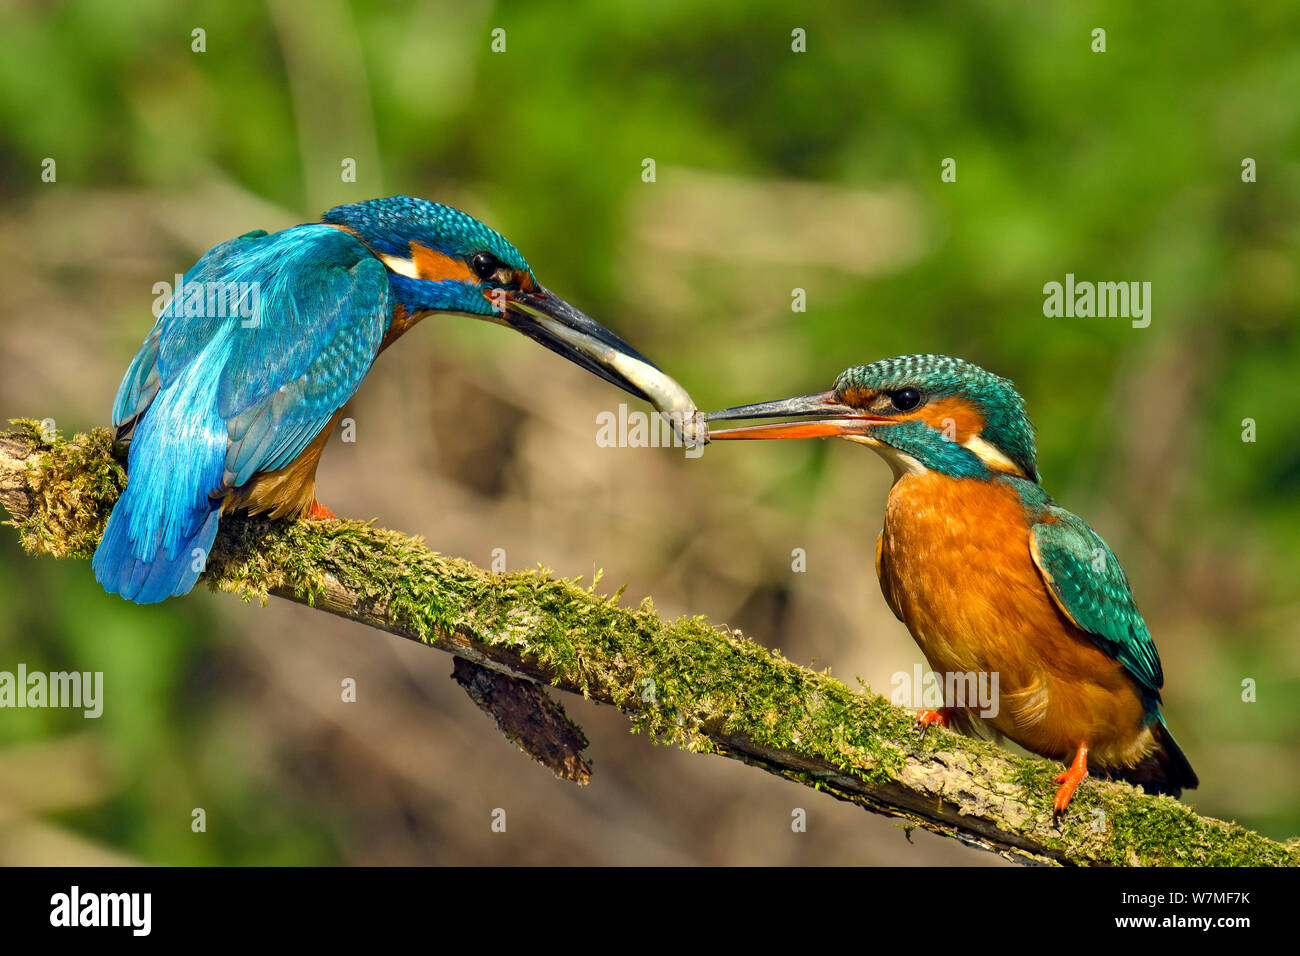 Kingfisher (Alcedo atthis) male passing fish to female spring during courtship behaviour, Hertfordshire, England, UK, March. Sequence 2 of 6. Stock Photo